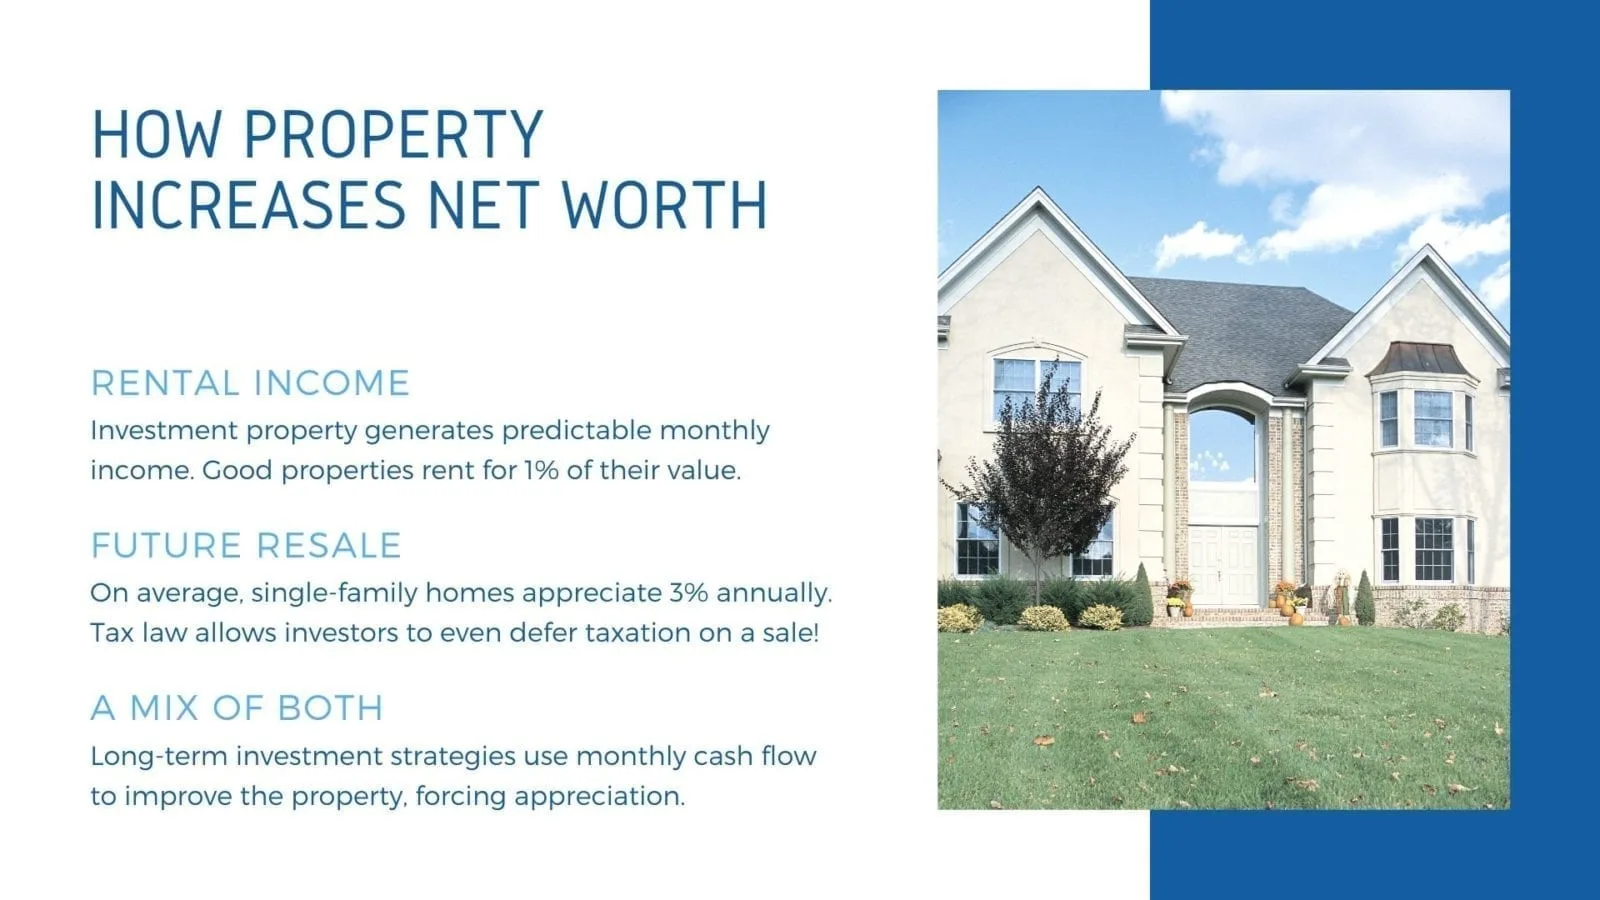 Chart describing the benefits of investment property